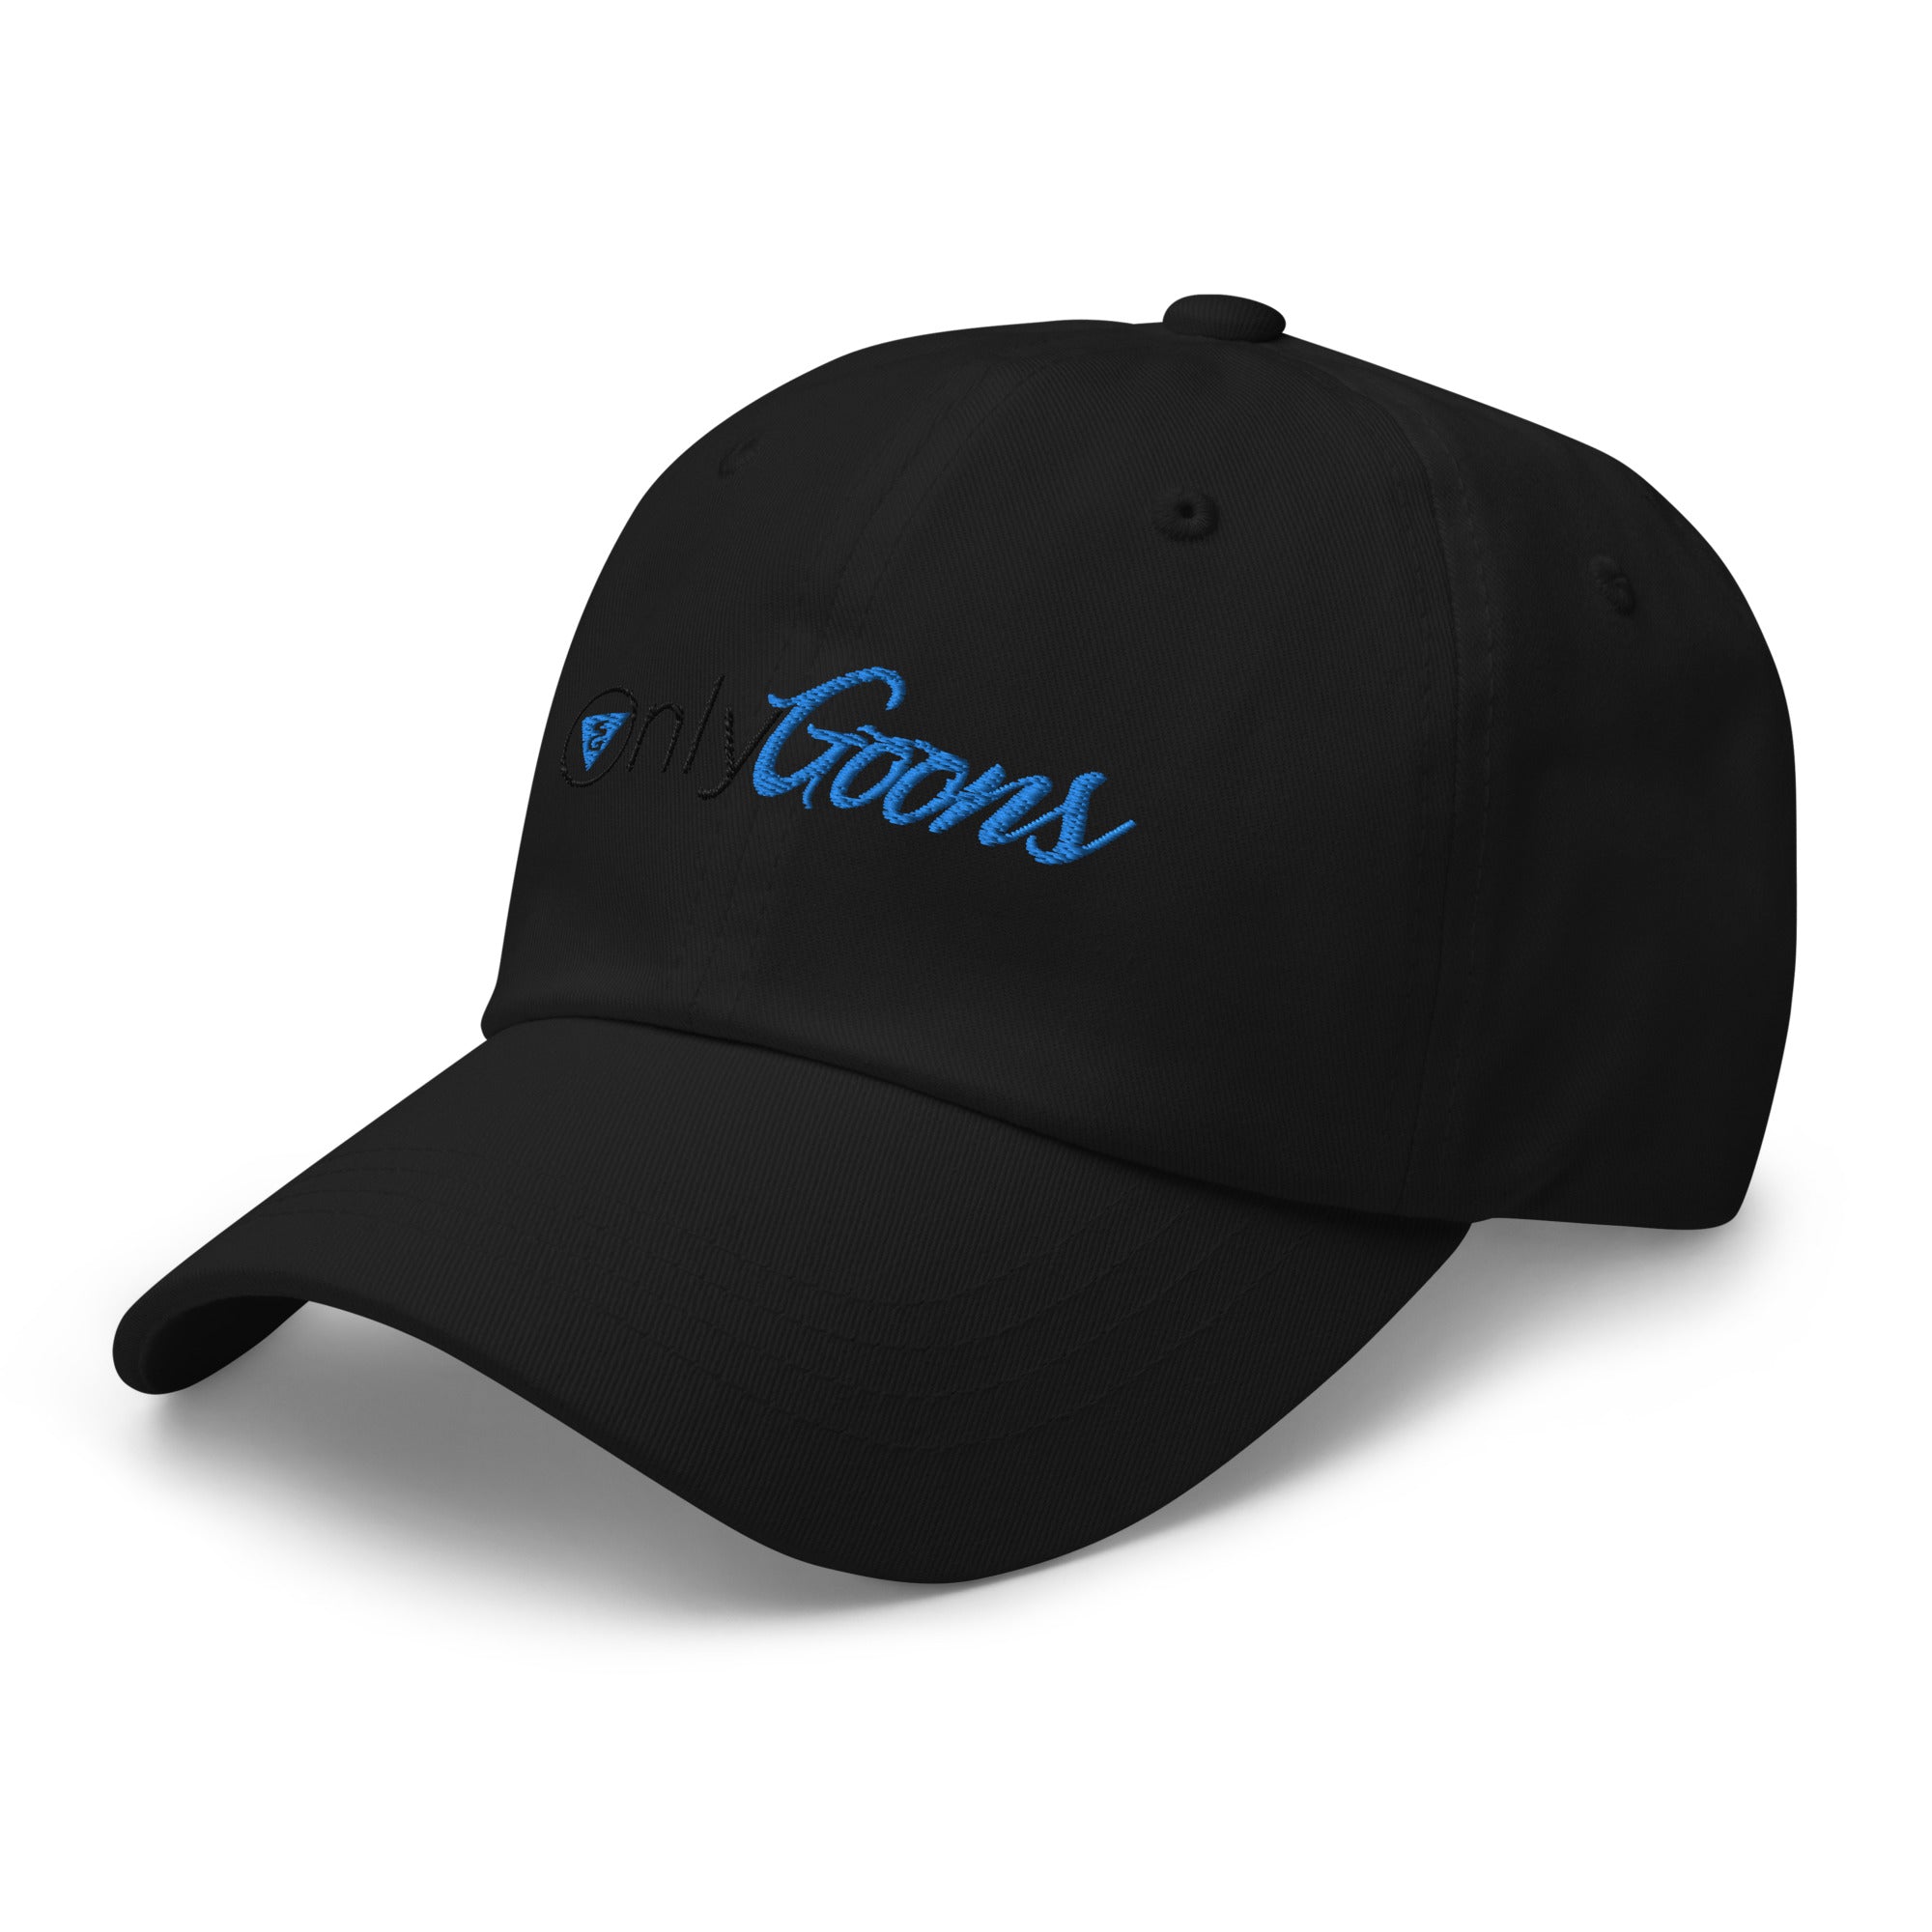 Only Goons Dad hat